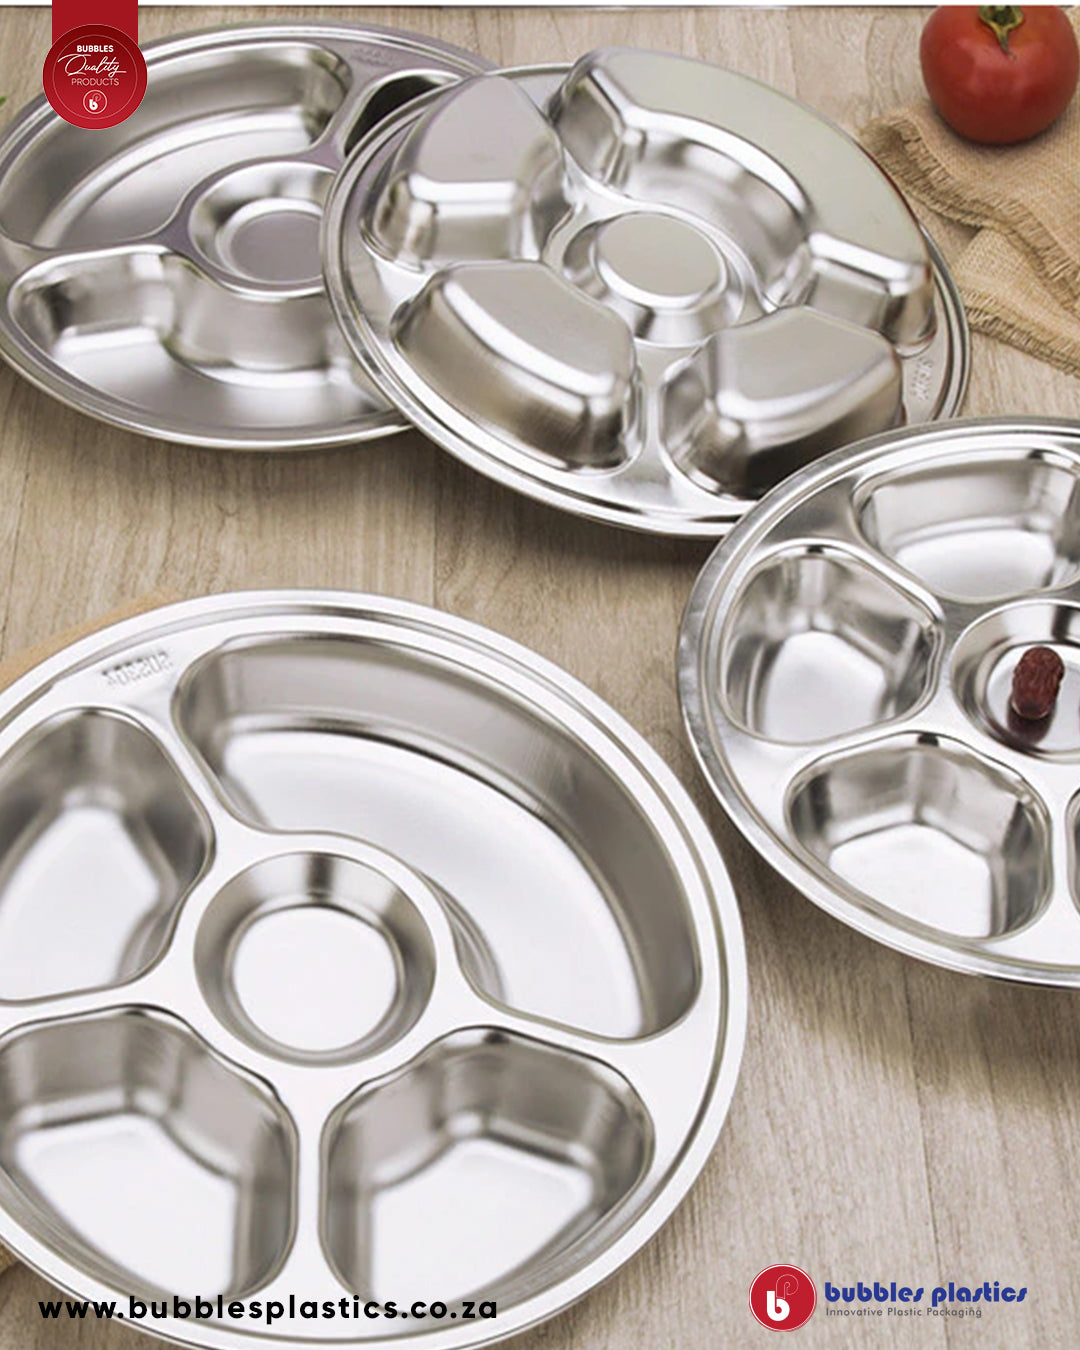 Round Stainless Steel 5 Division Snack Tray